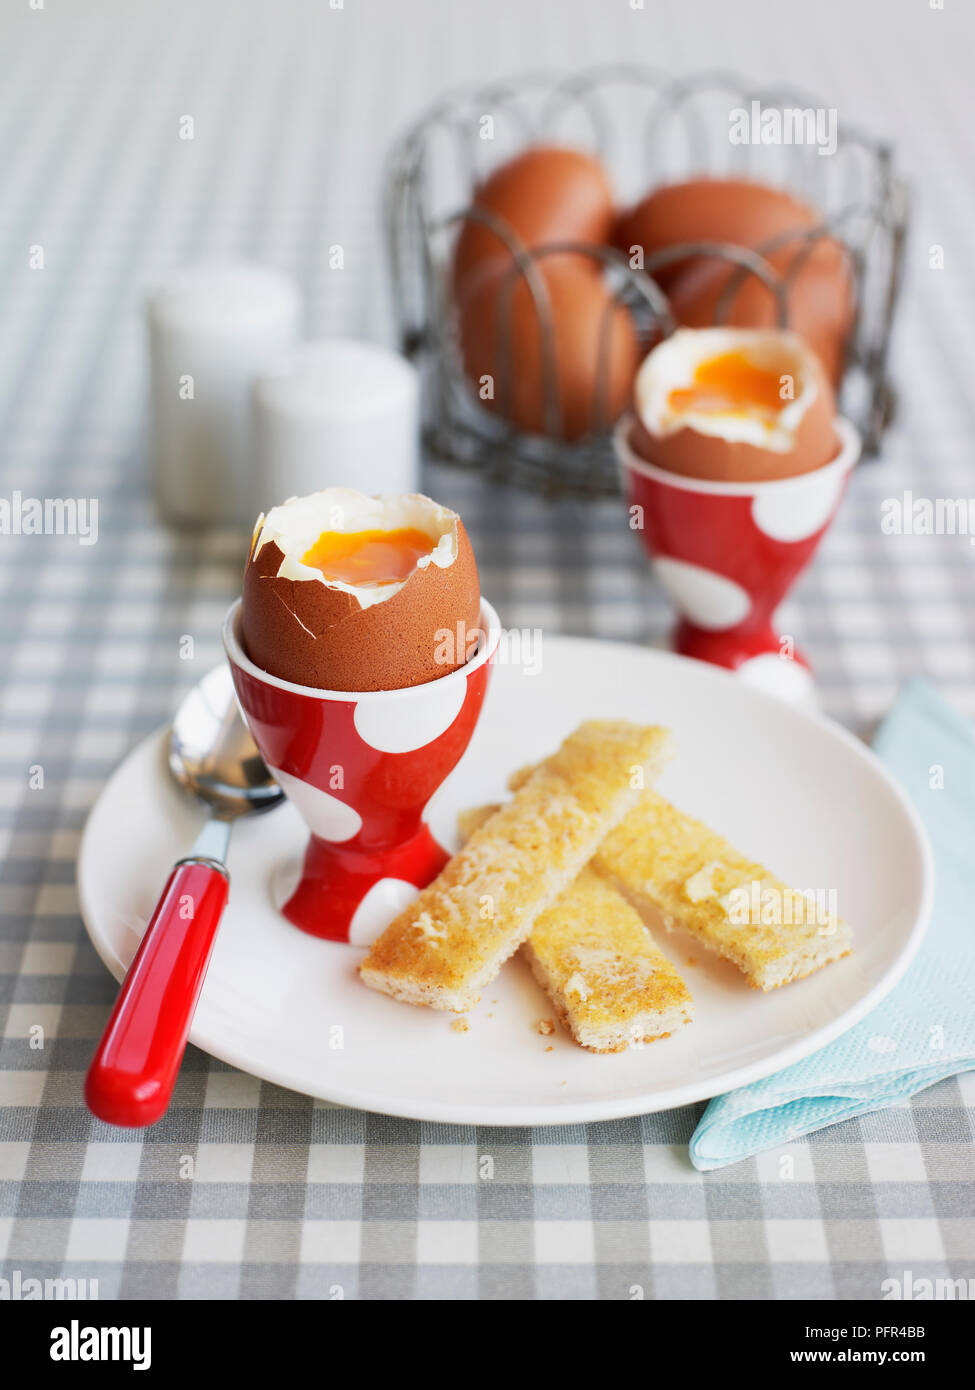 Boiled egg with soldiers Stock Photo